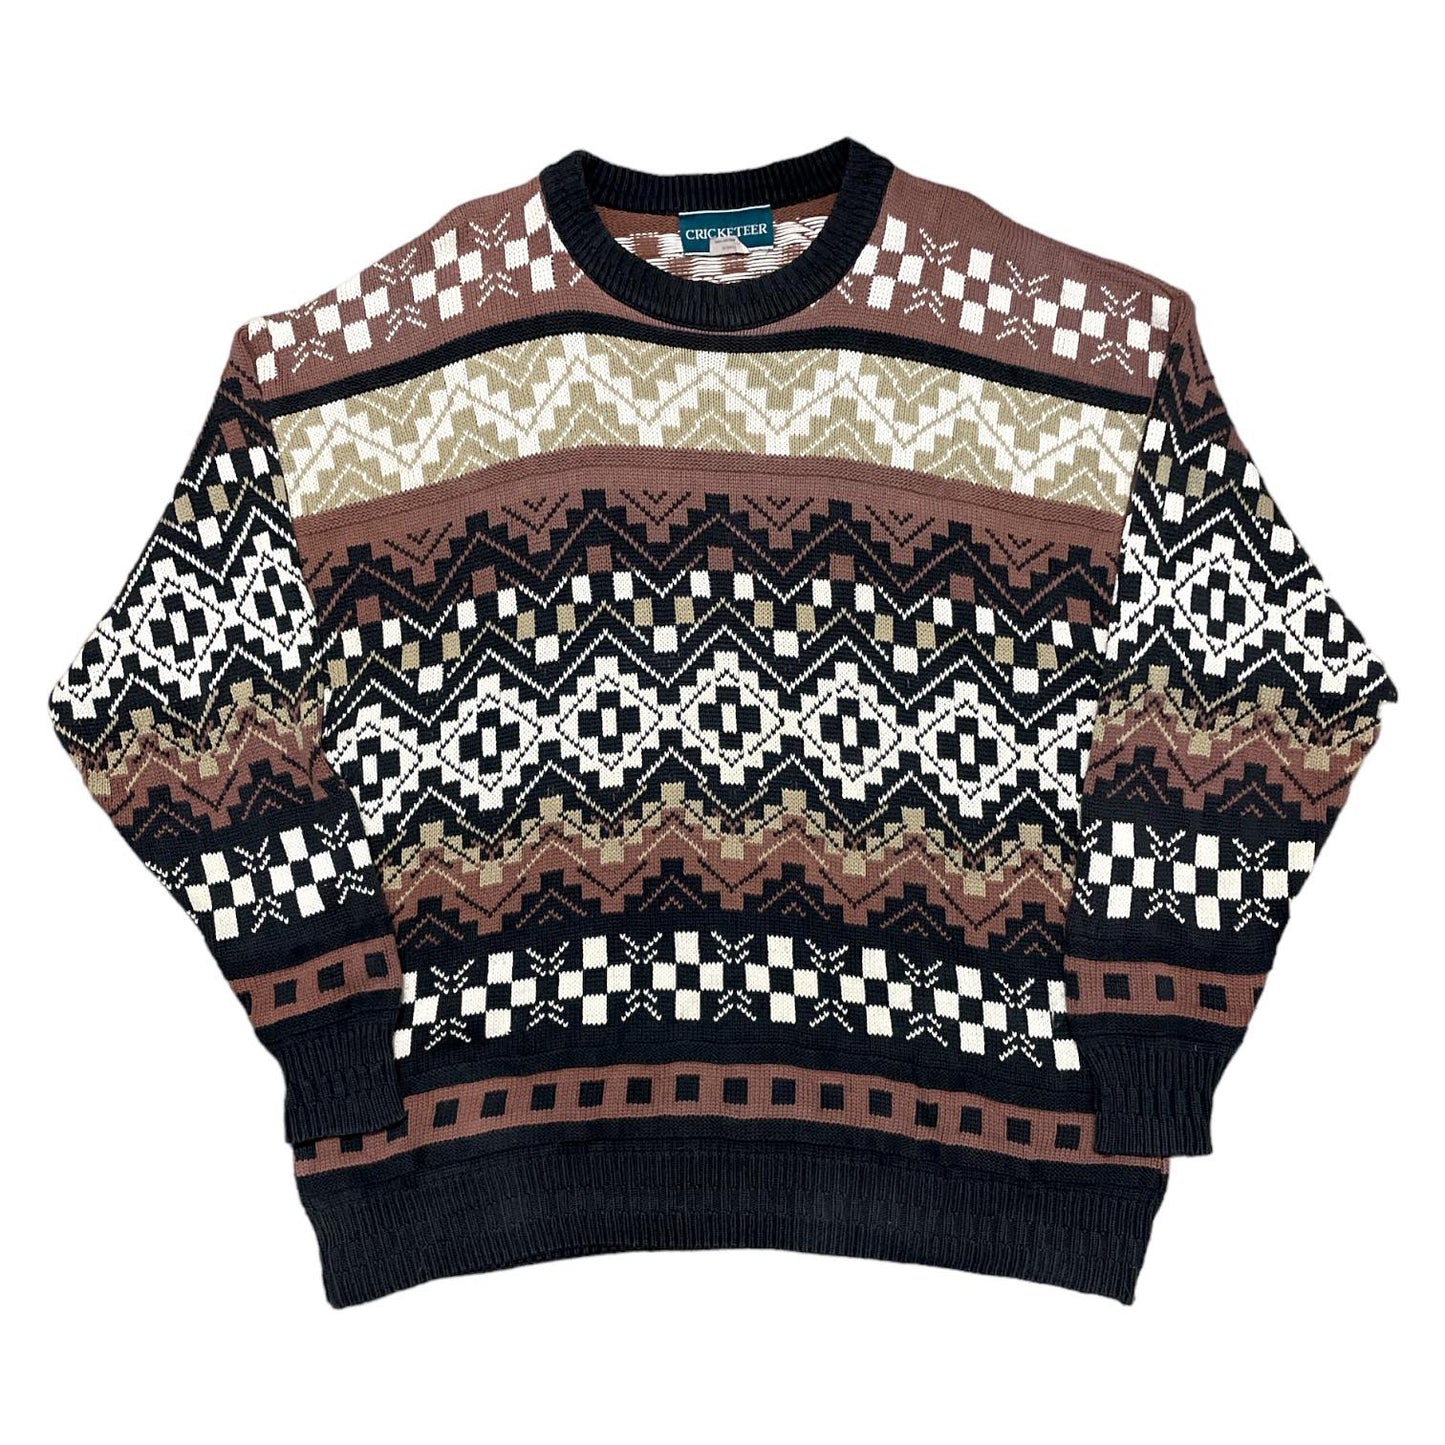 CRICKETEER KNIT SWEATER - XL